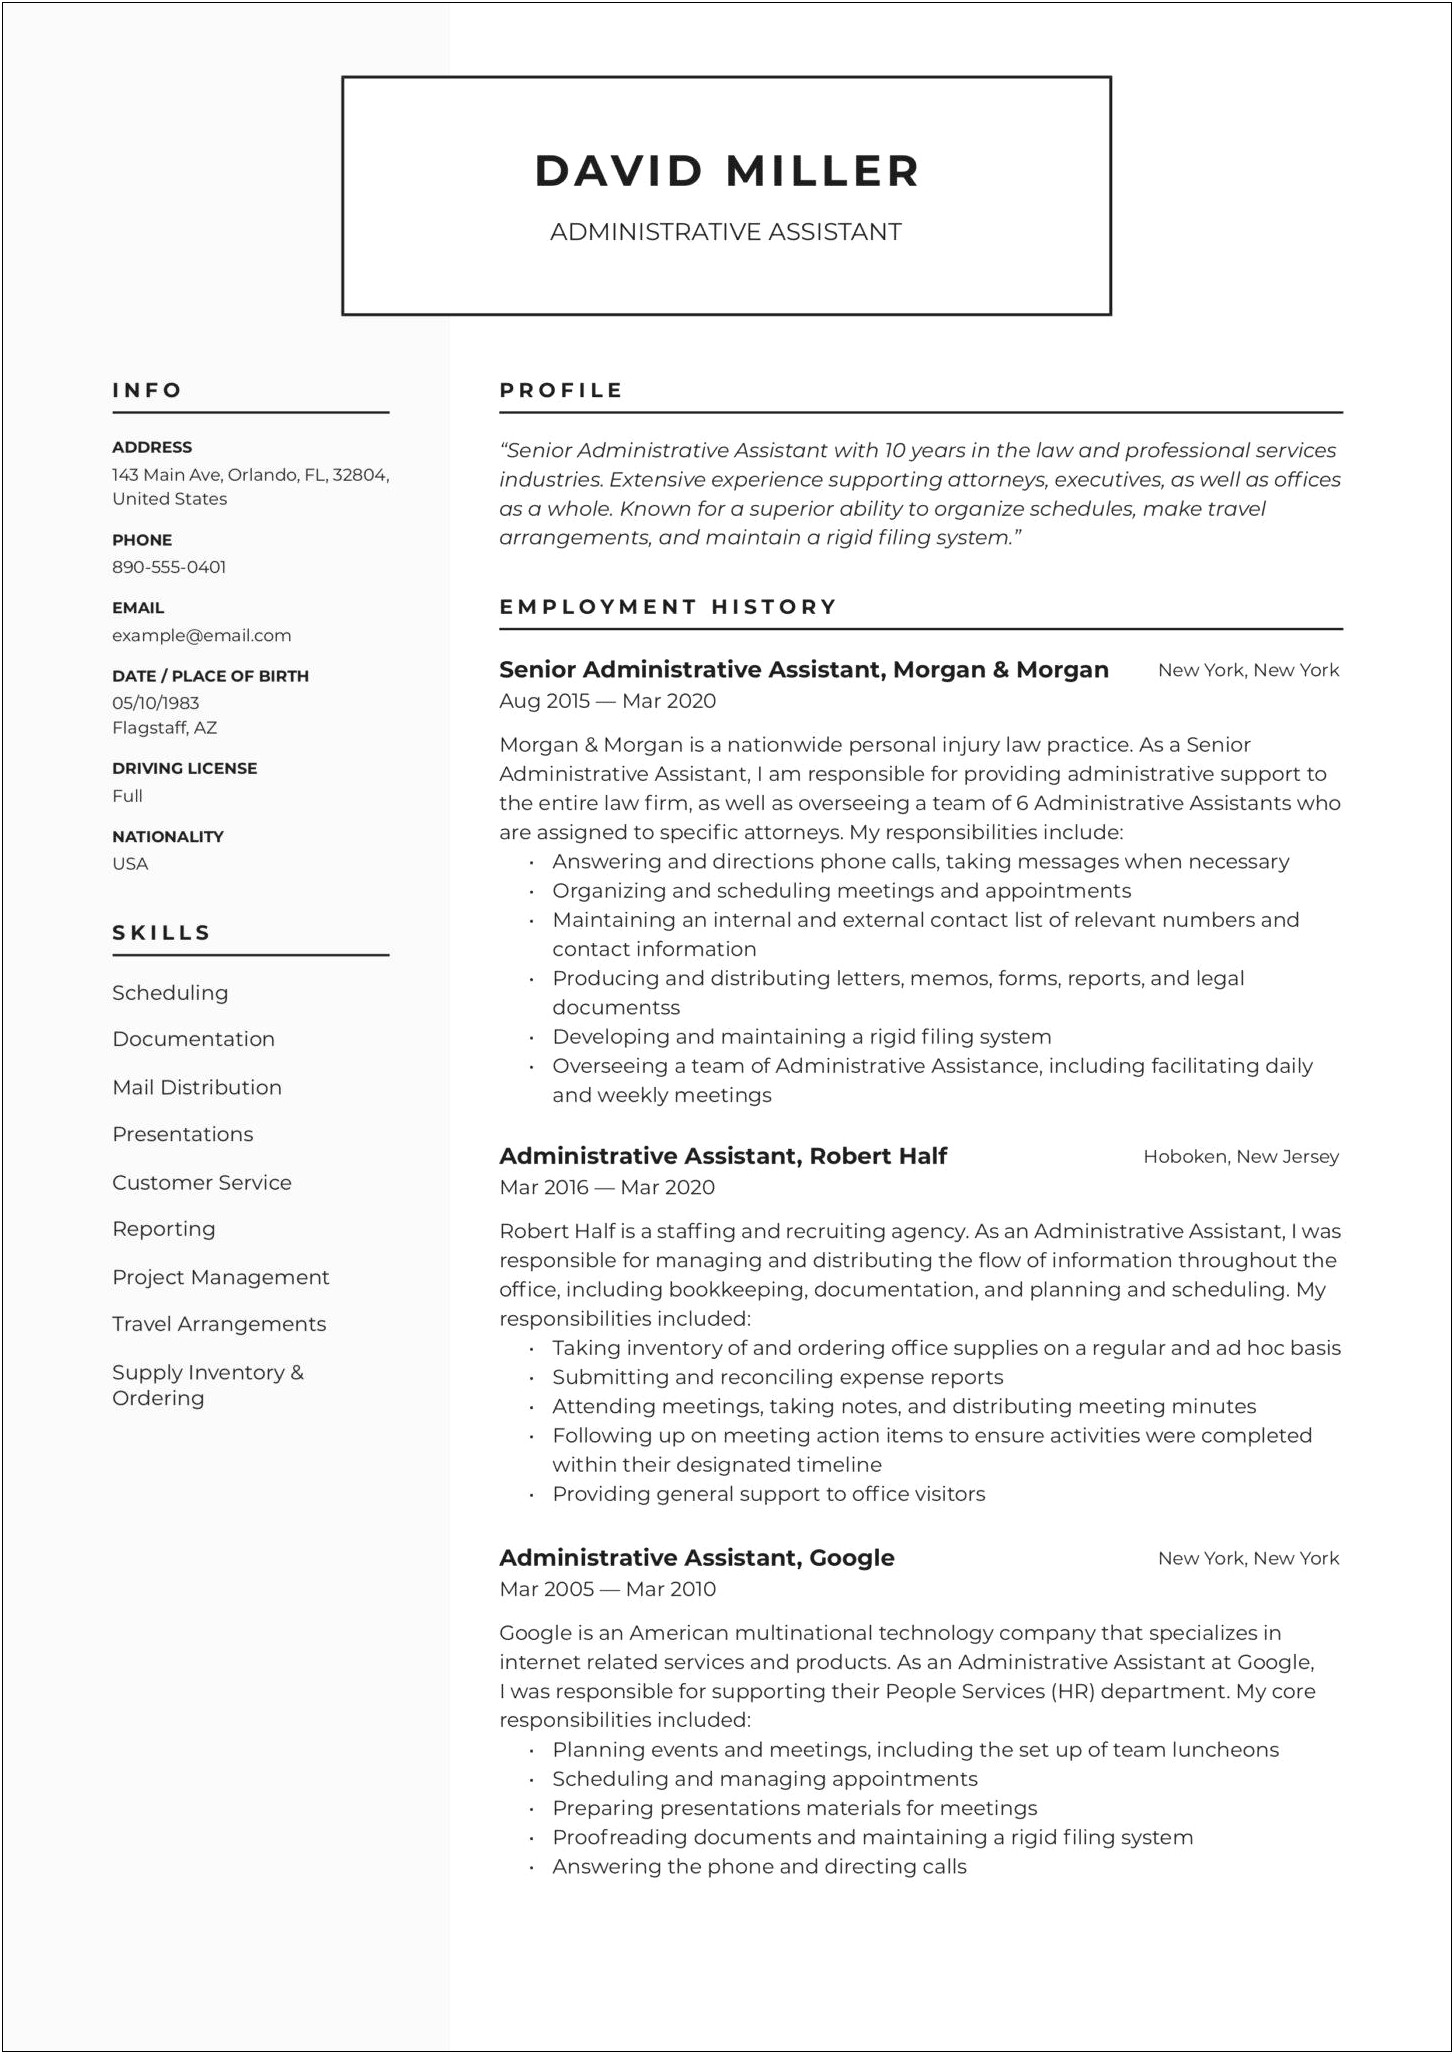 Samples Of Functional Resumes For Administrative Assistant